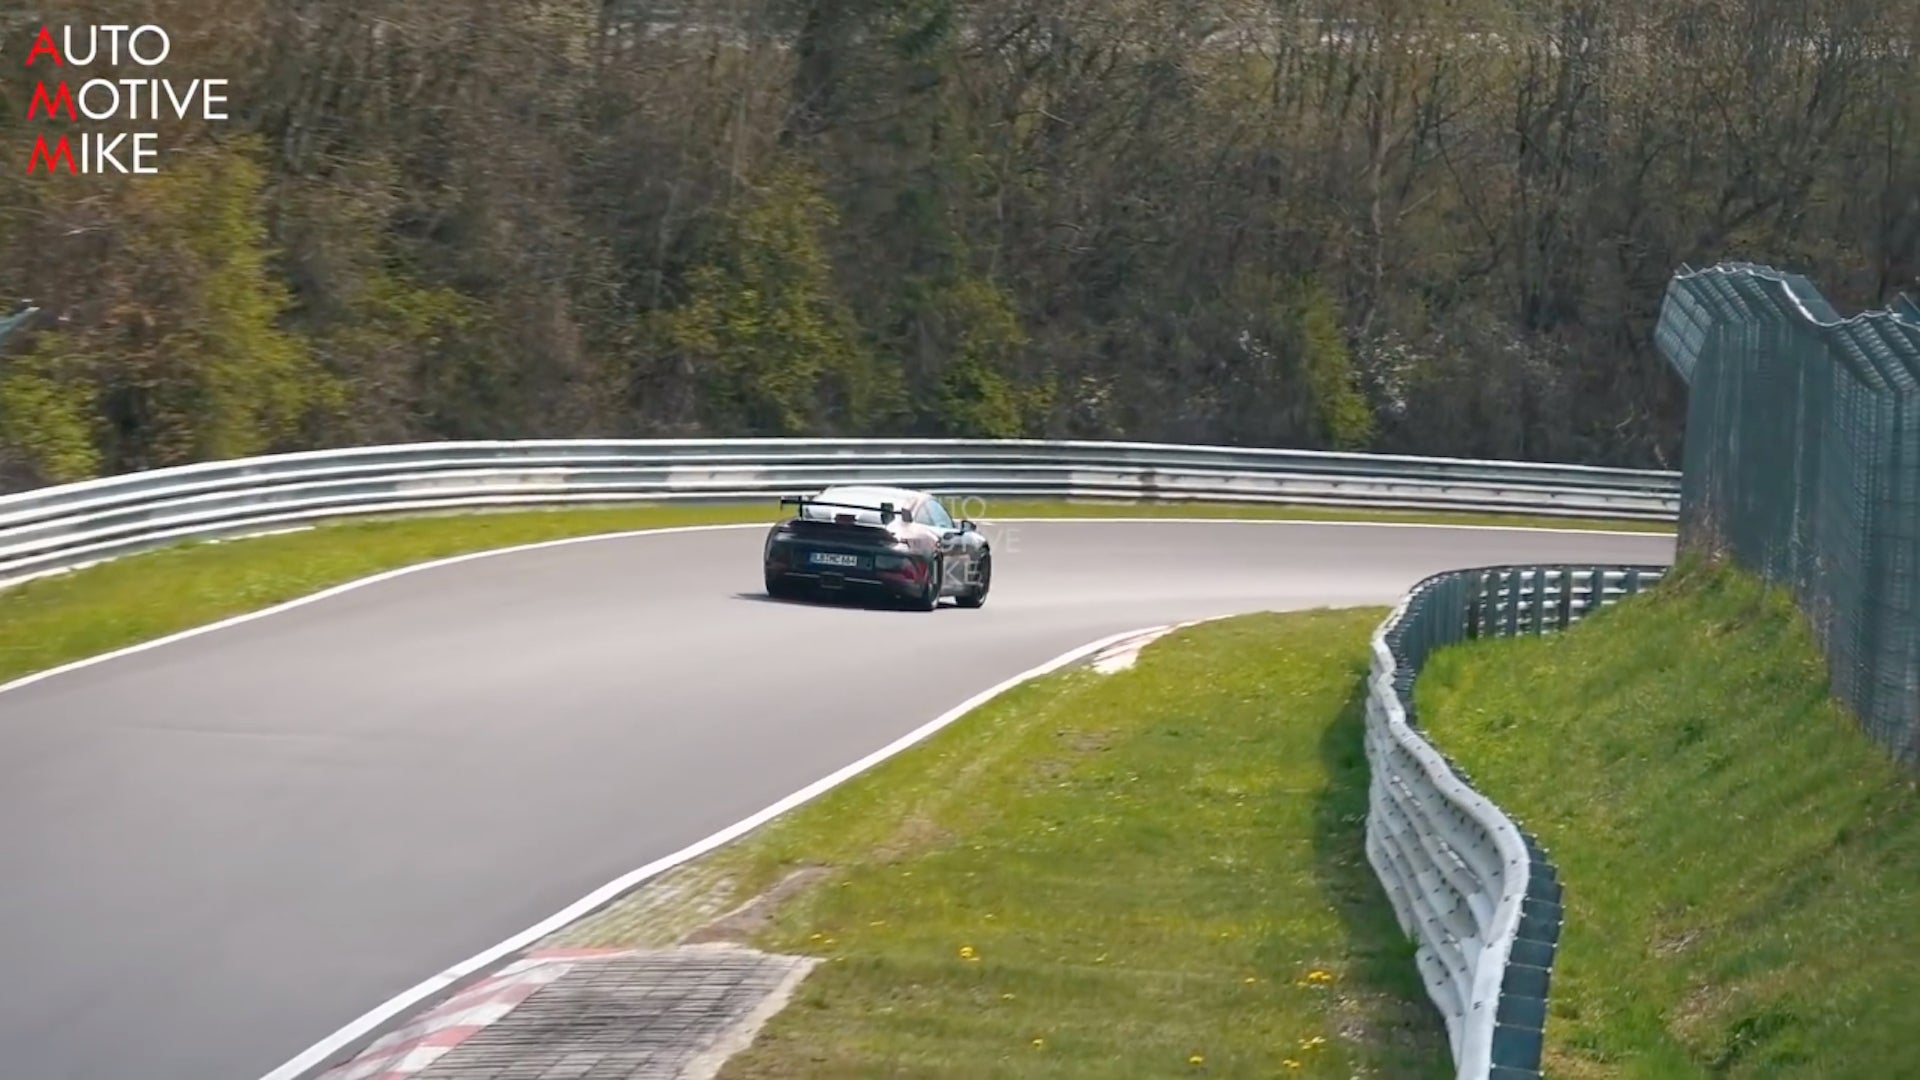 992-Generation Porsche 911 GT3 Looks Right at Home Blitzing the Nürburgring